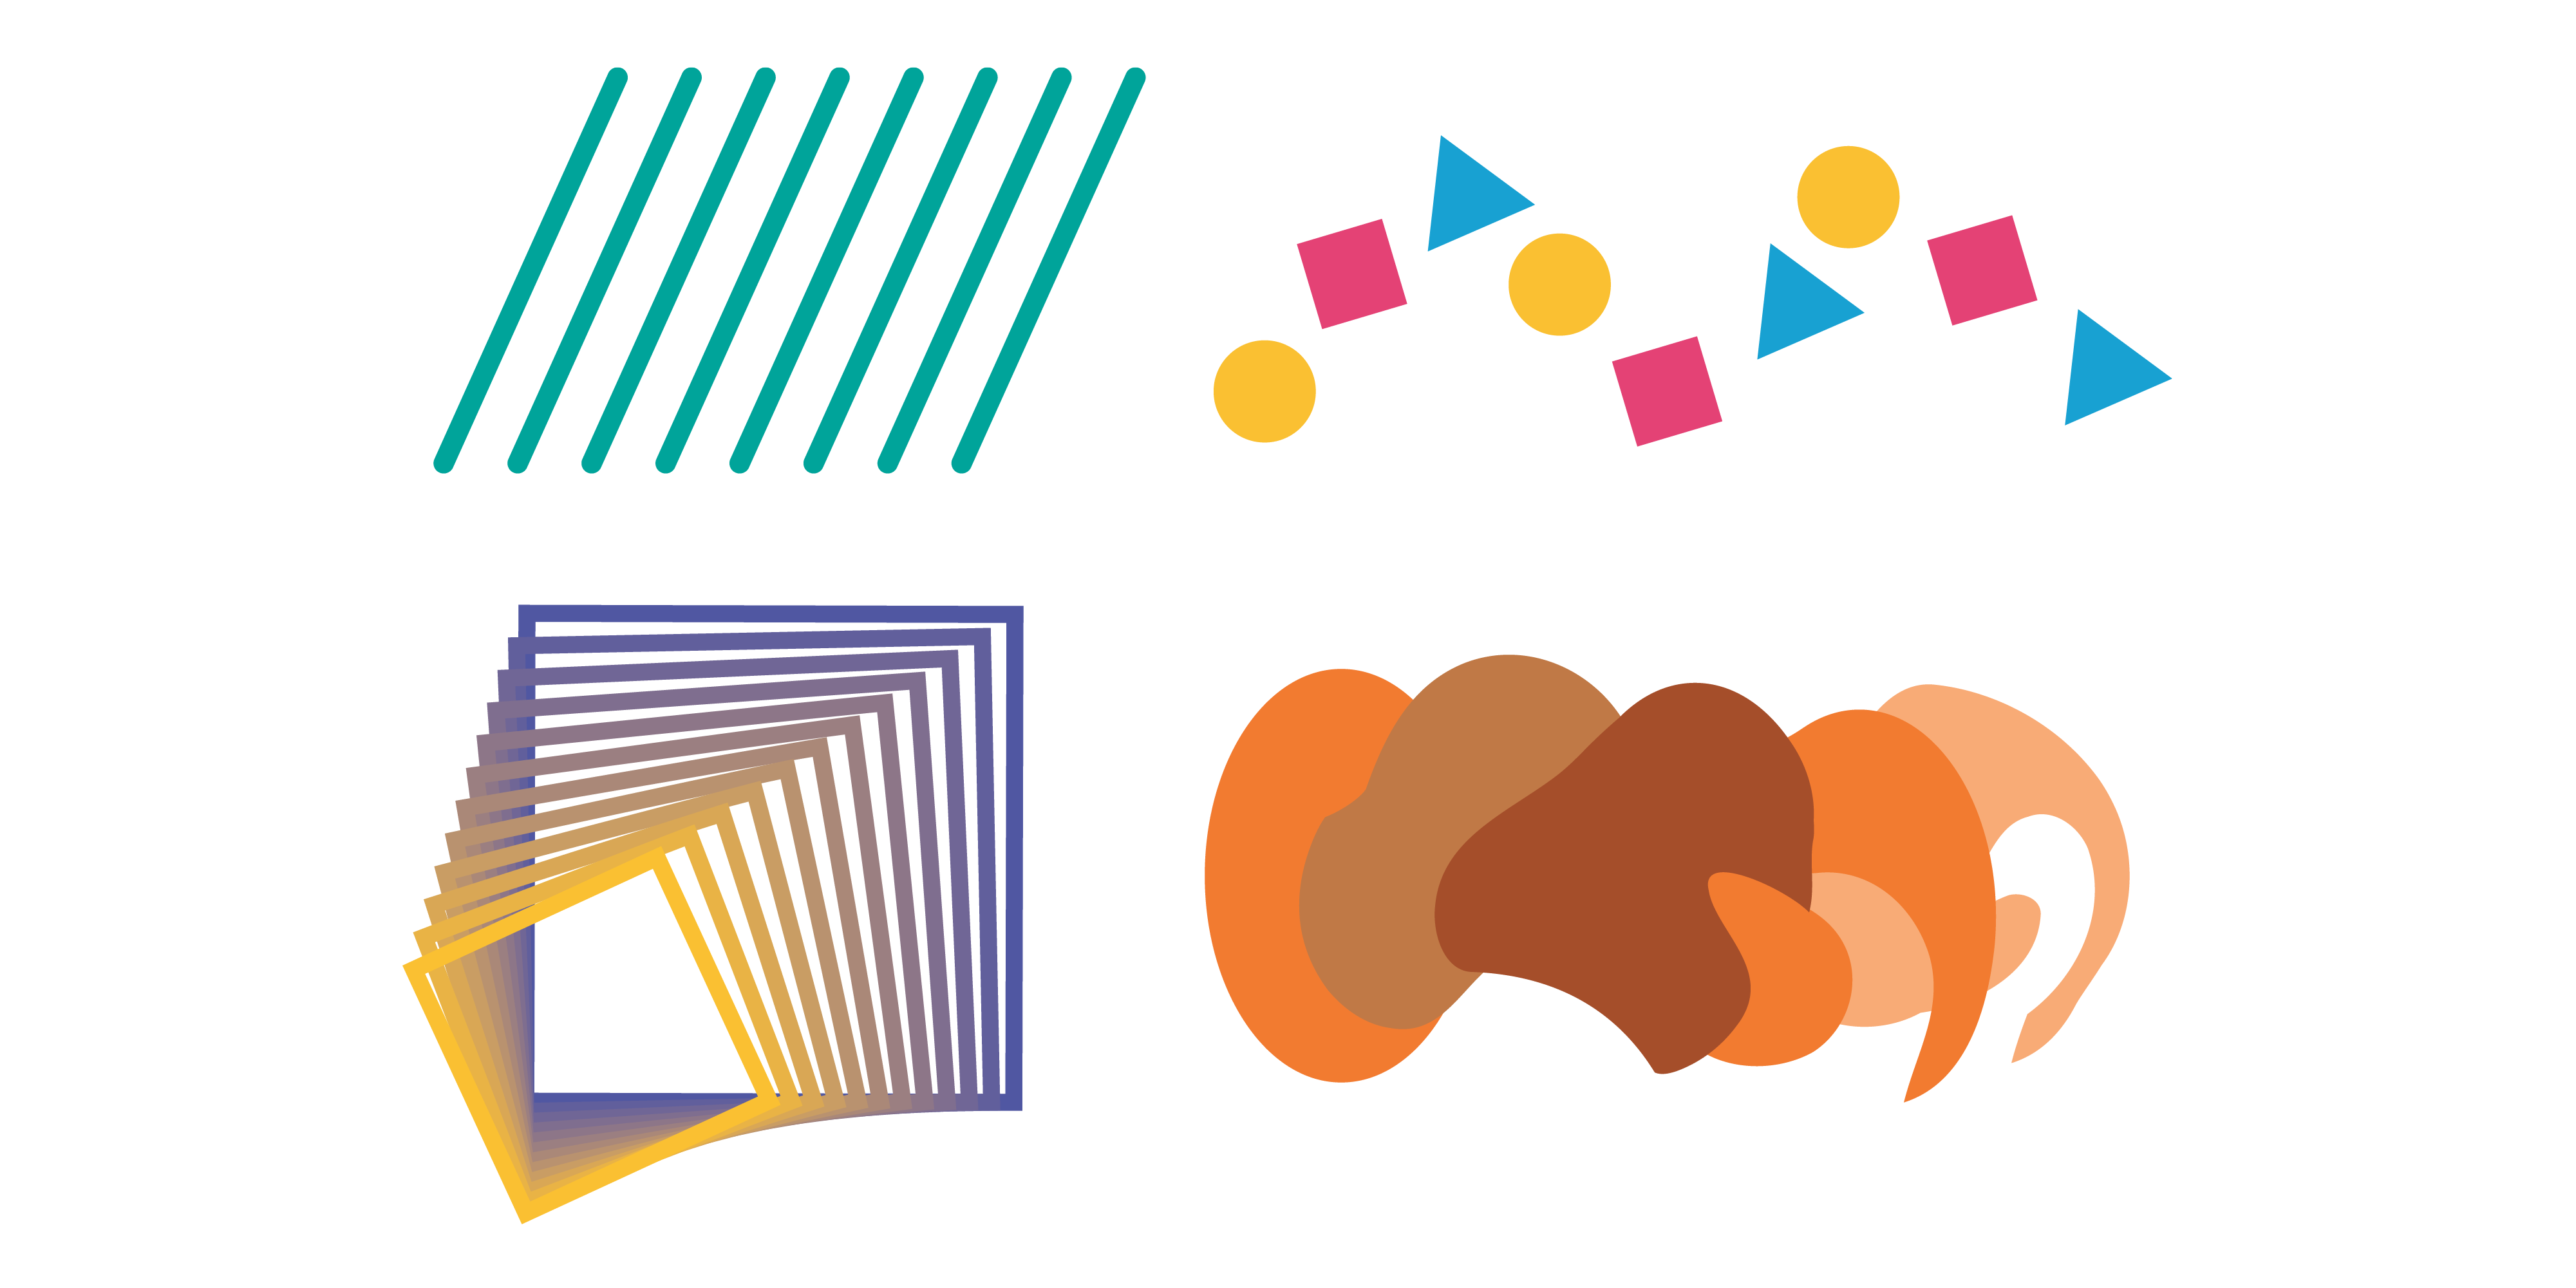 4 different examples of rhythm: on the top left are repeating lines in teal, on the top right are repeating groups--each with a yellow circle, a pink sphere, and a blue triangle--, on the bottom left are repeating yellow and blue squares--where each one rotates a bit more to the right--, and on the bottom right is a line of undulating organic forms in different monochromatic brown and yellow colours.